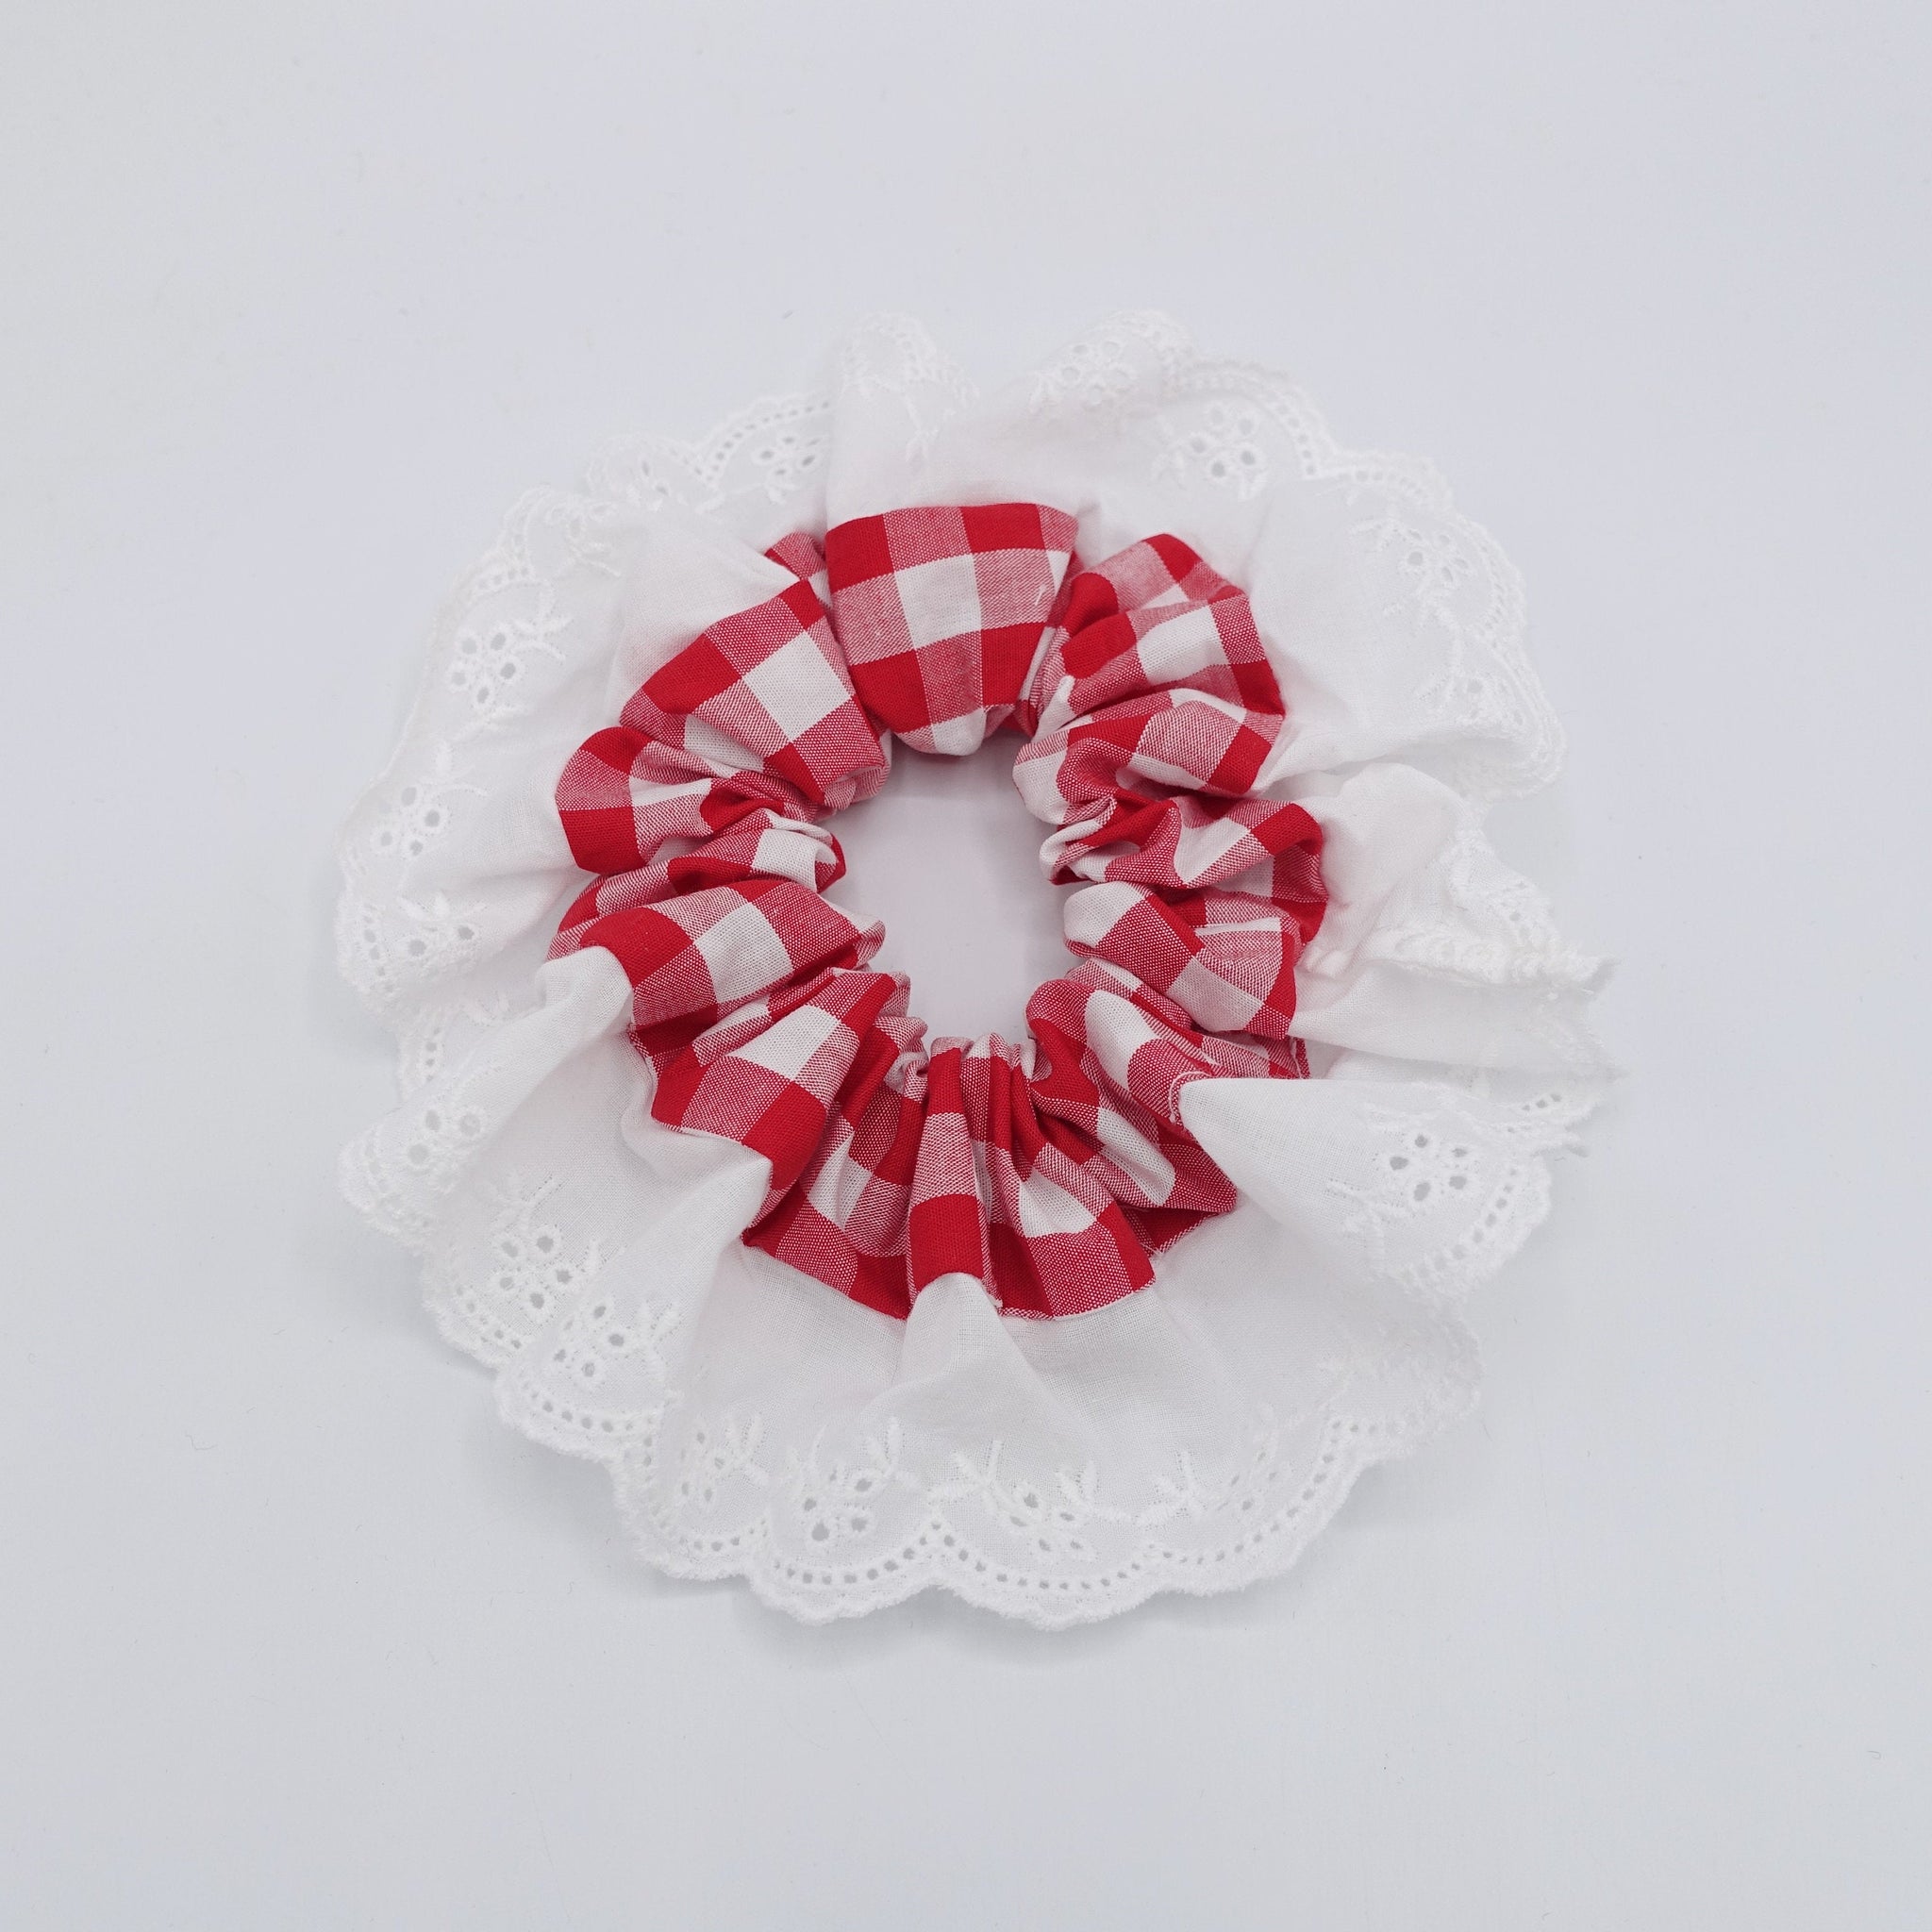 veryshine.com Scrunchies Red gingham scrunchies, eyelet lace scrunchies, cotton hair tie for women